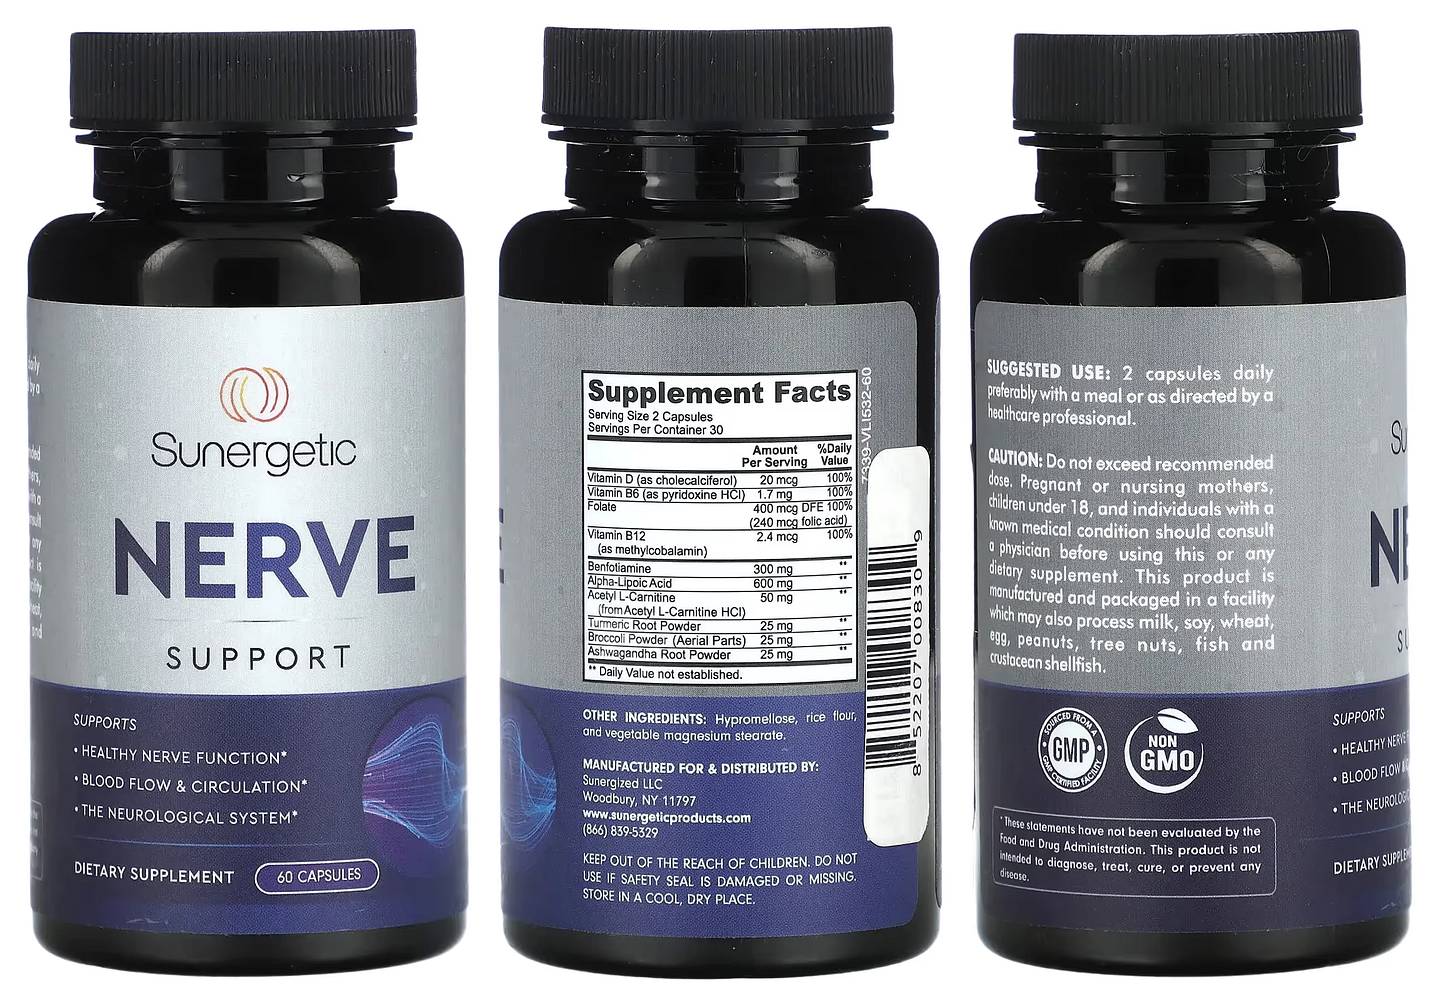 Sunergetic, Nerve Support packaging